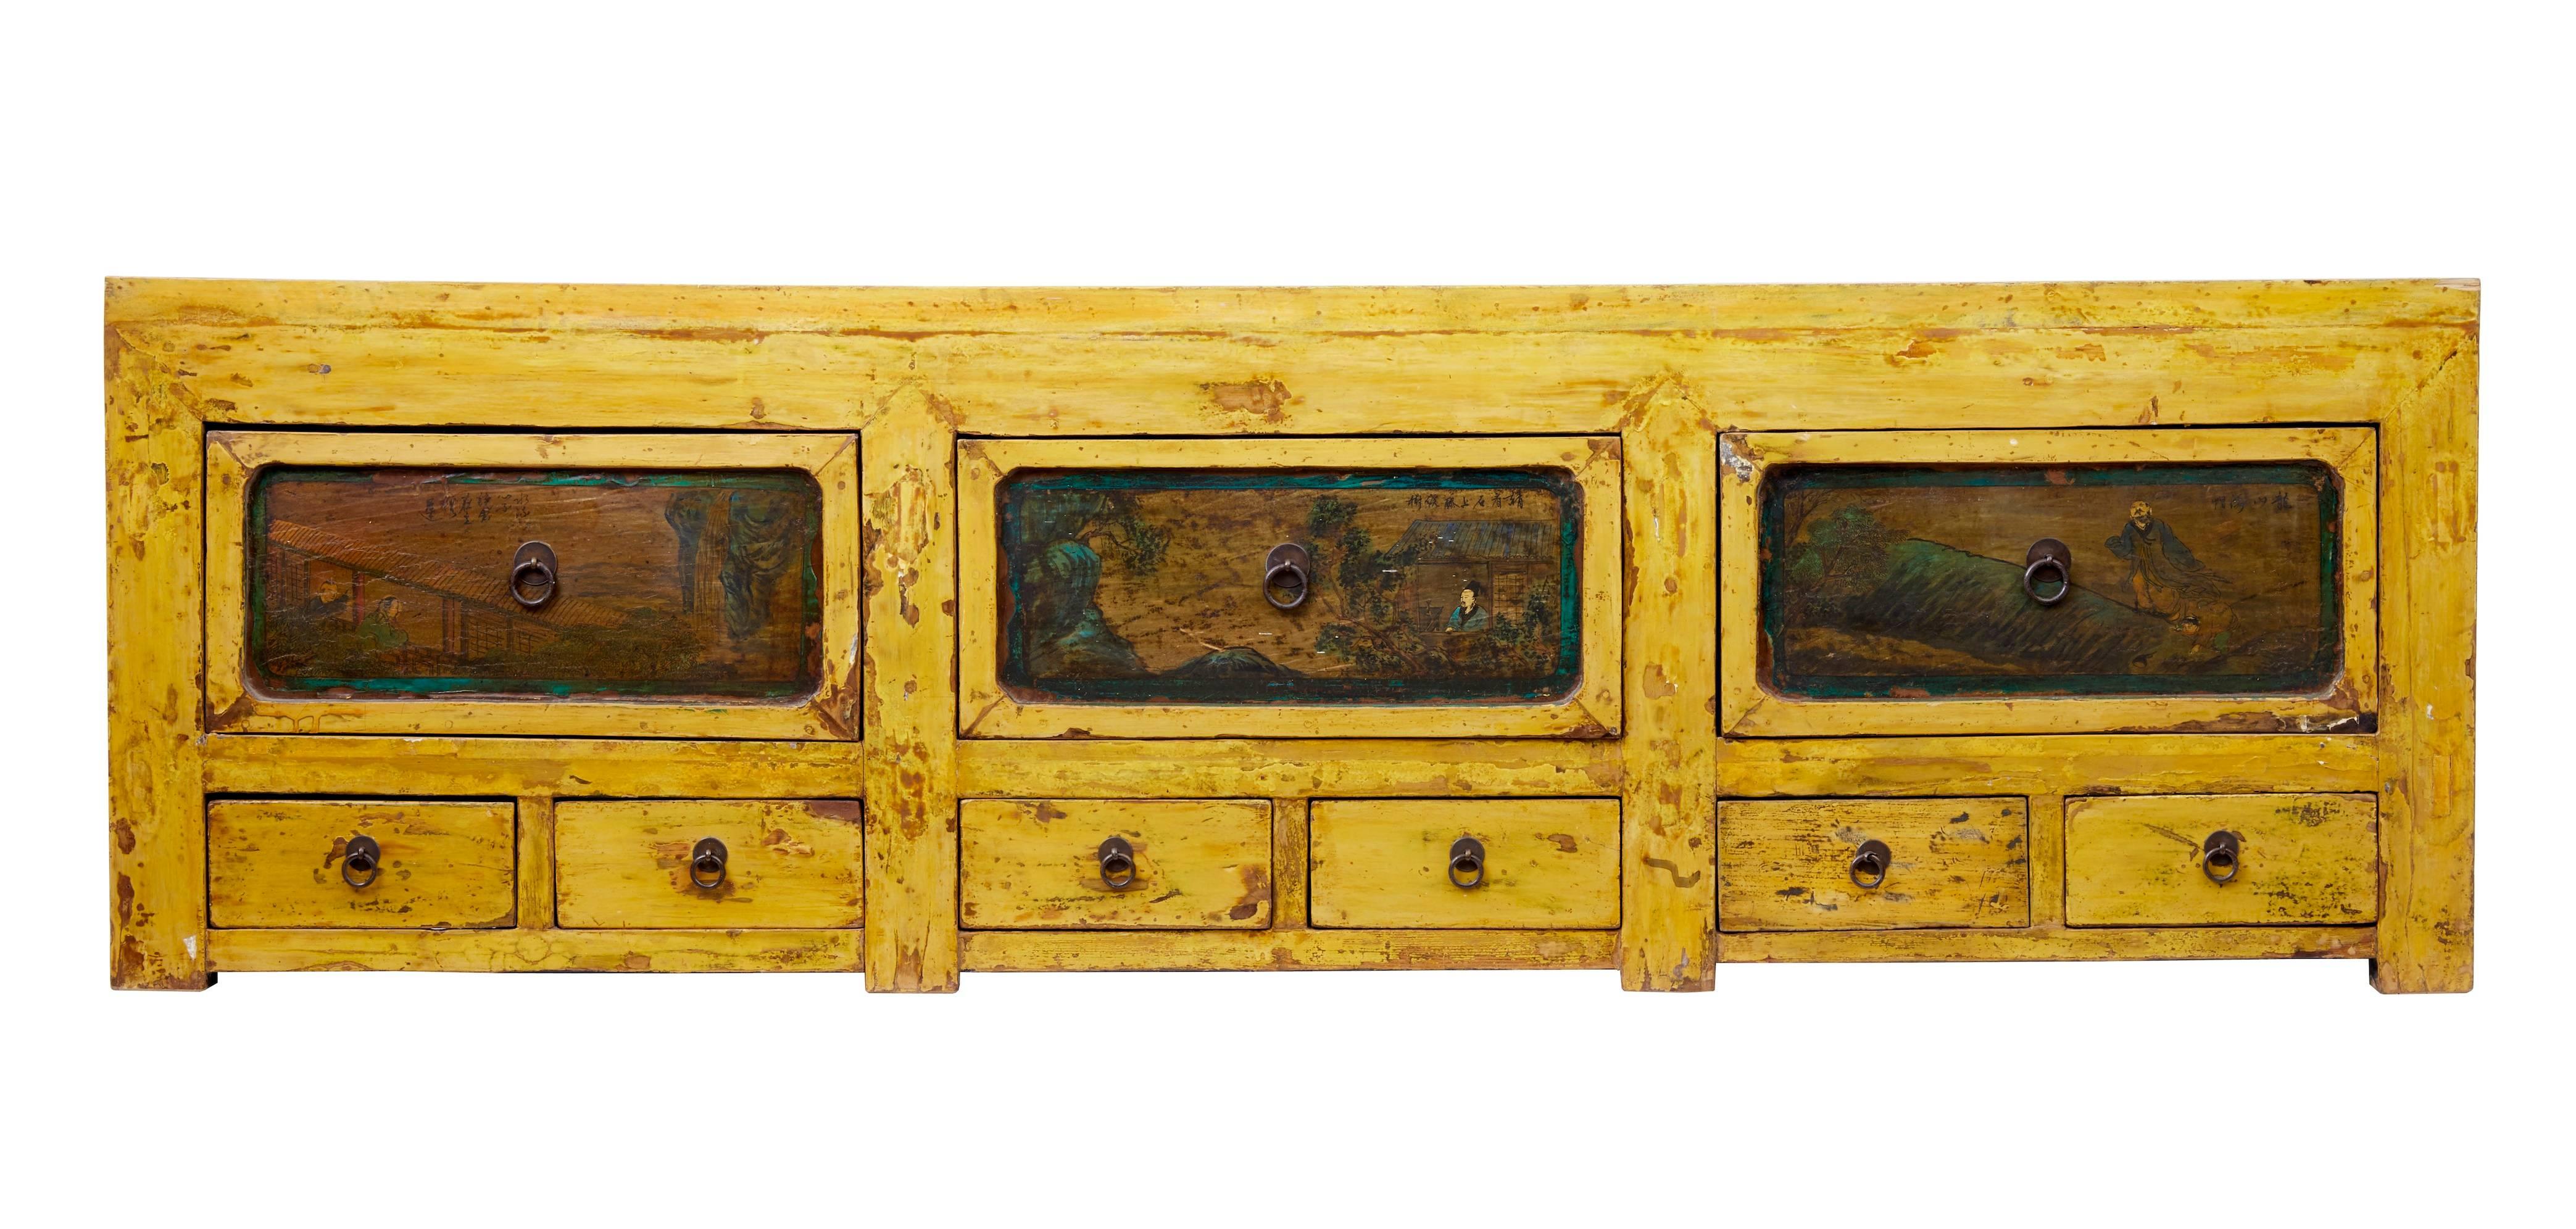 Large Chinese Gansu region sideboard, circa 1850.
Three lots of one deep drawer above two smaller drawers (nine in total)
Large drawers have painted traditional Chinese scenes on them.
Striking yellow lacquer has small losses, there is also a